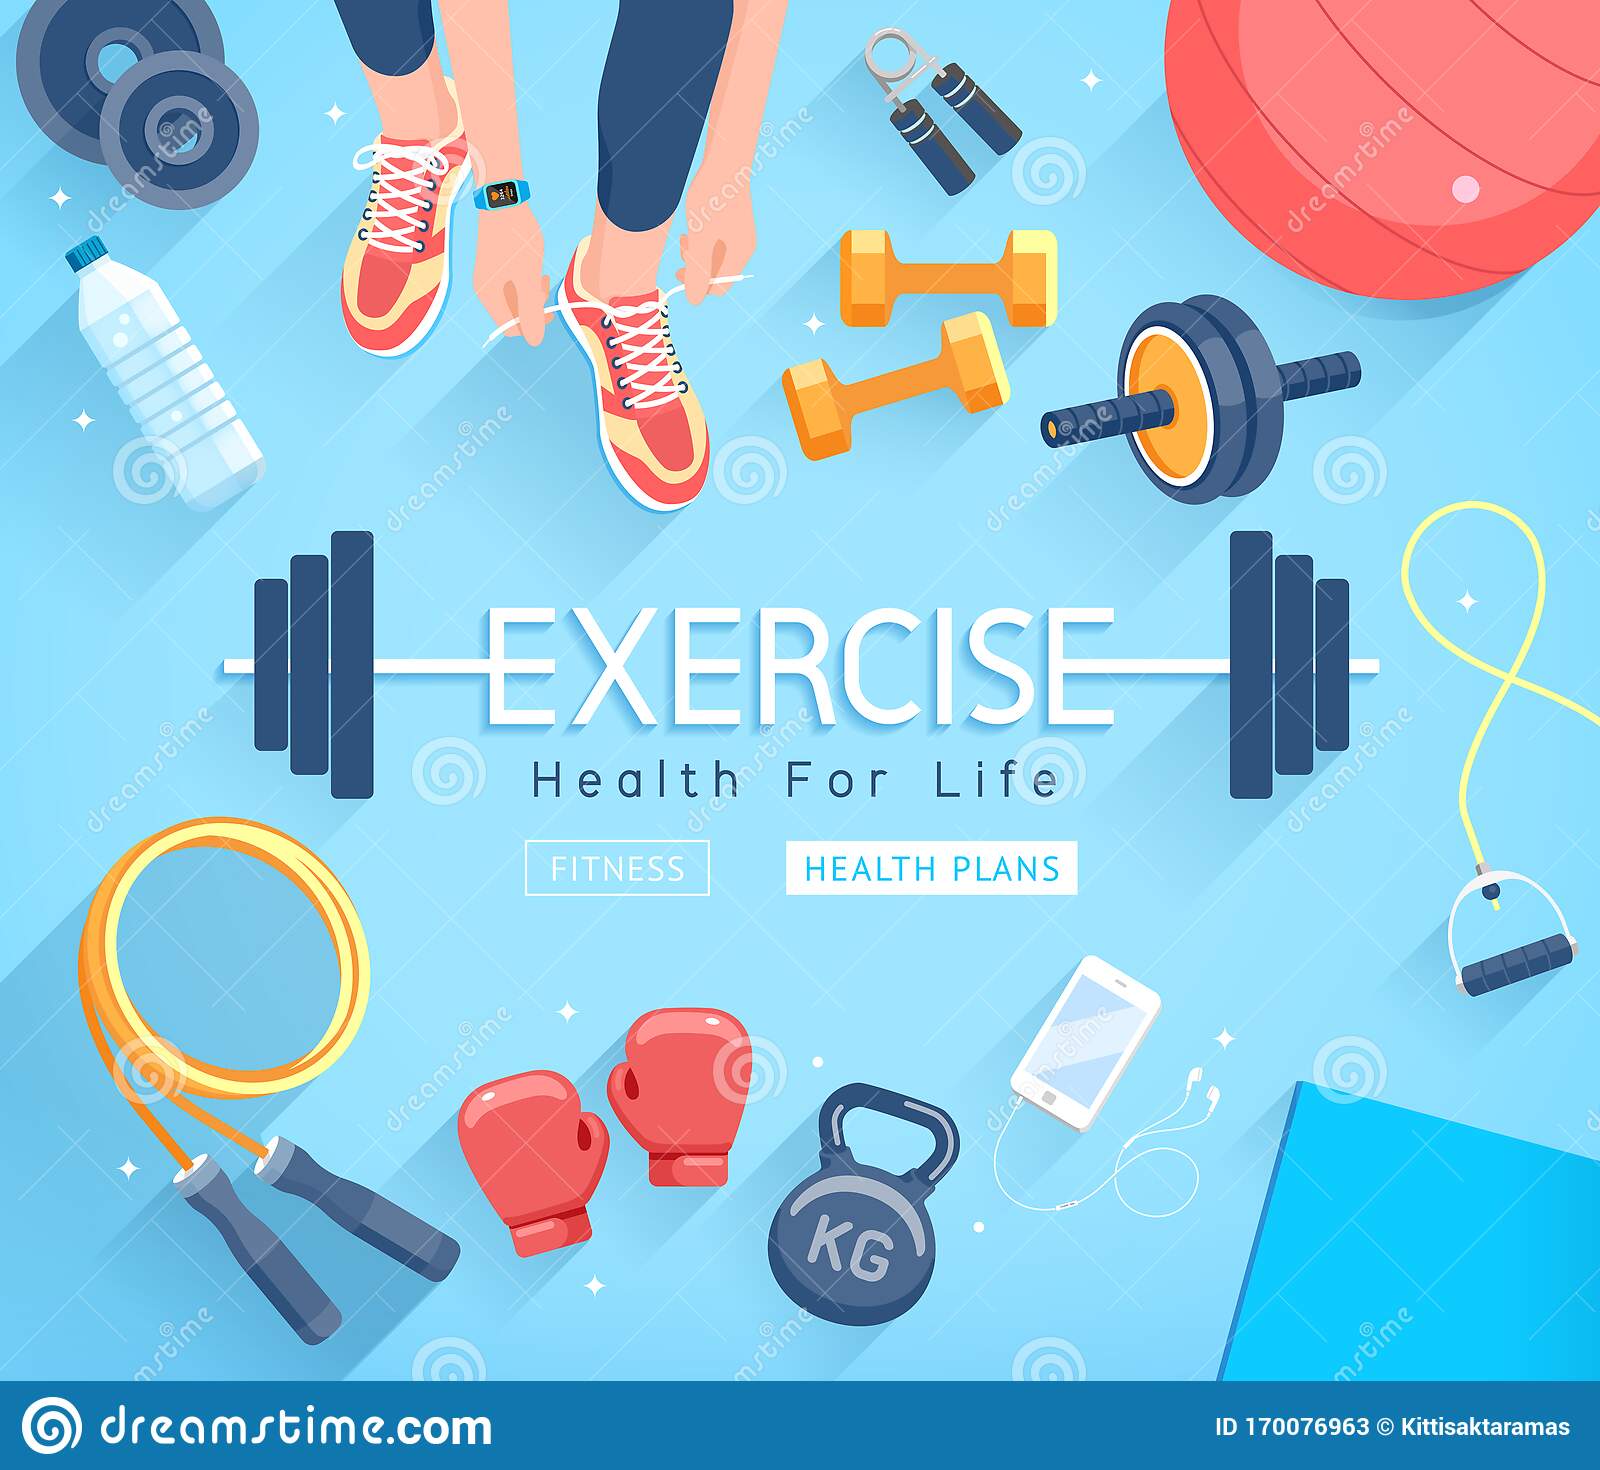 Exercise Background Stock Photos, Images and Backgrounds for Free Download